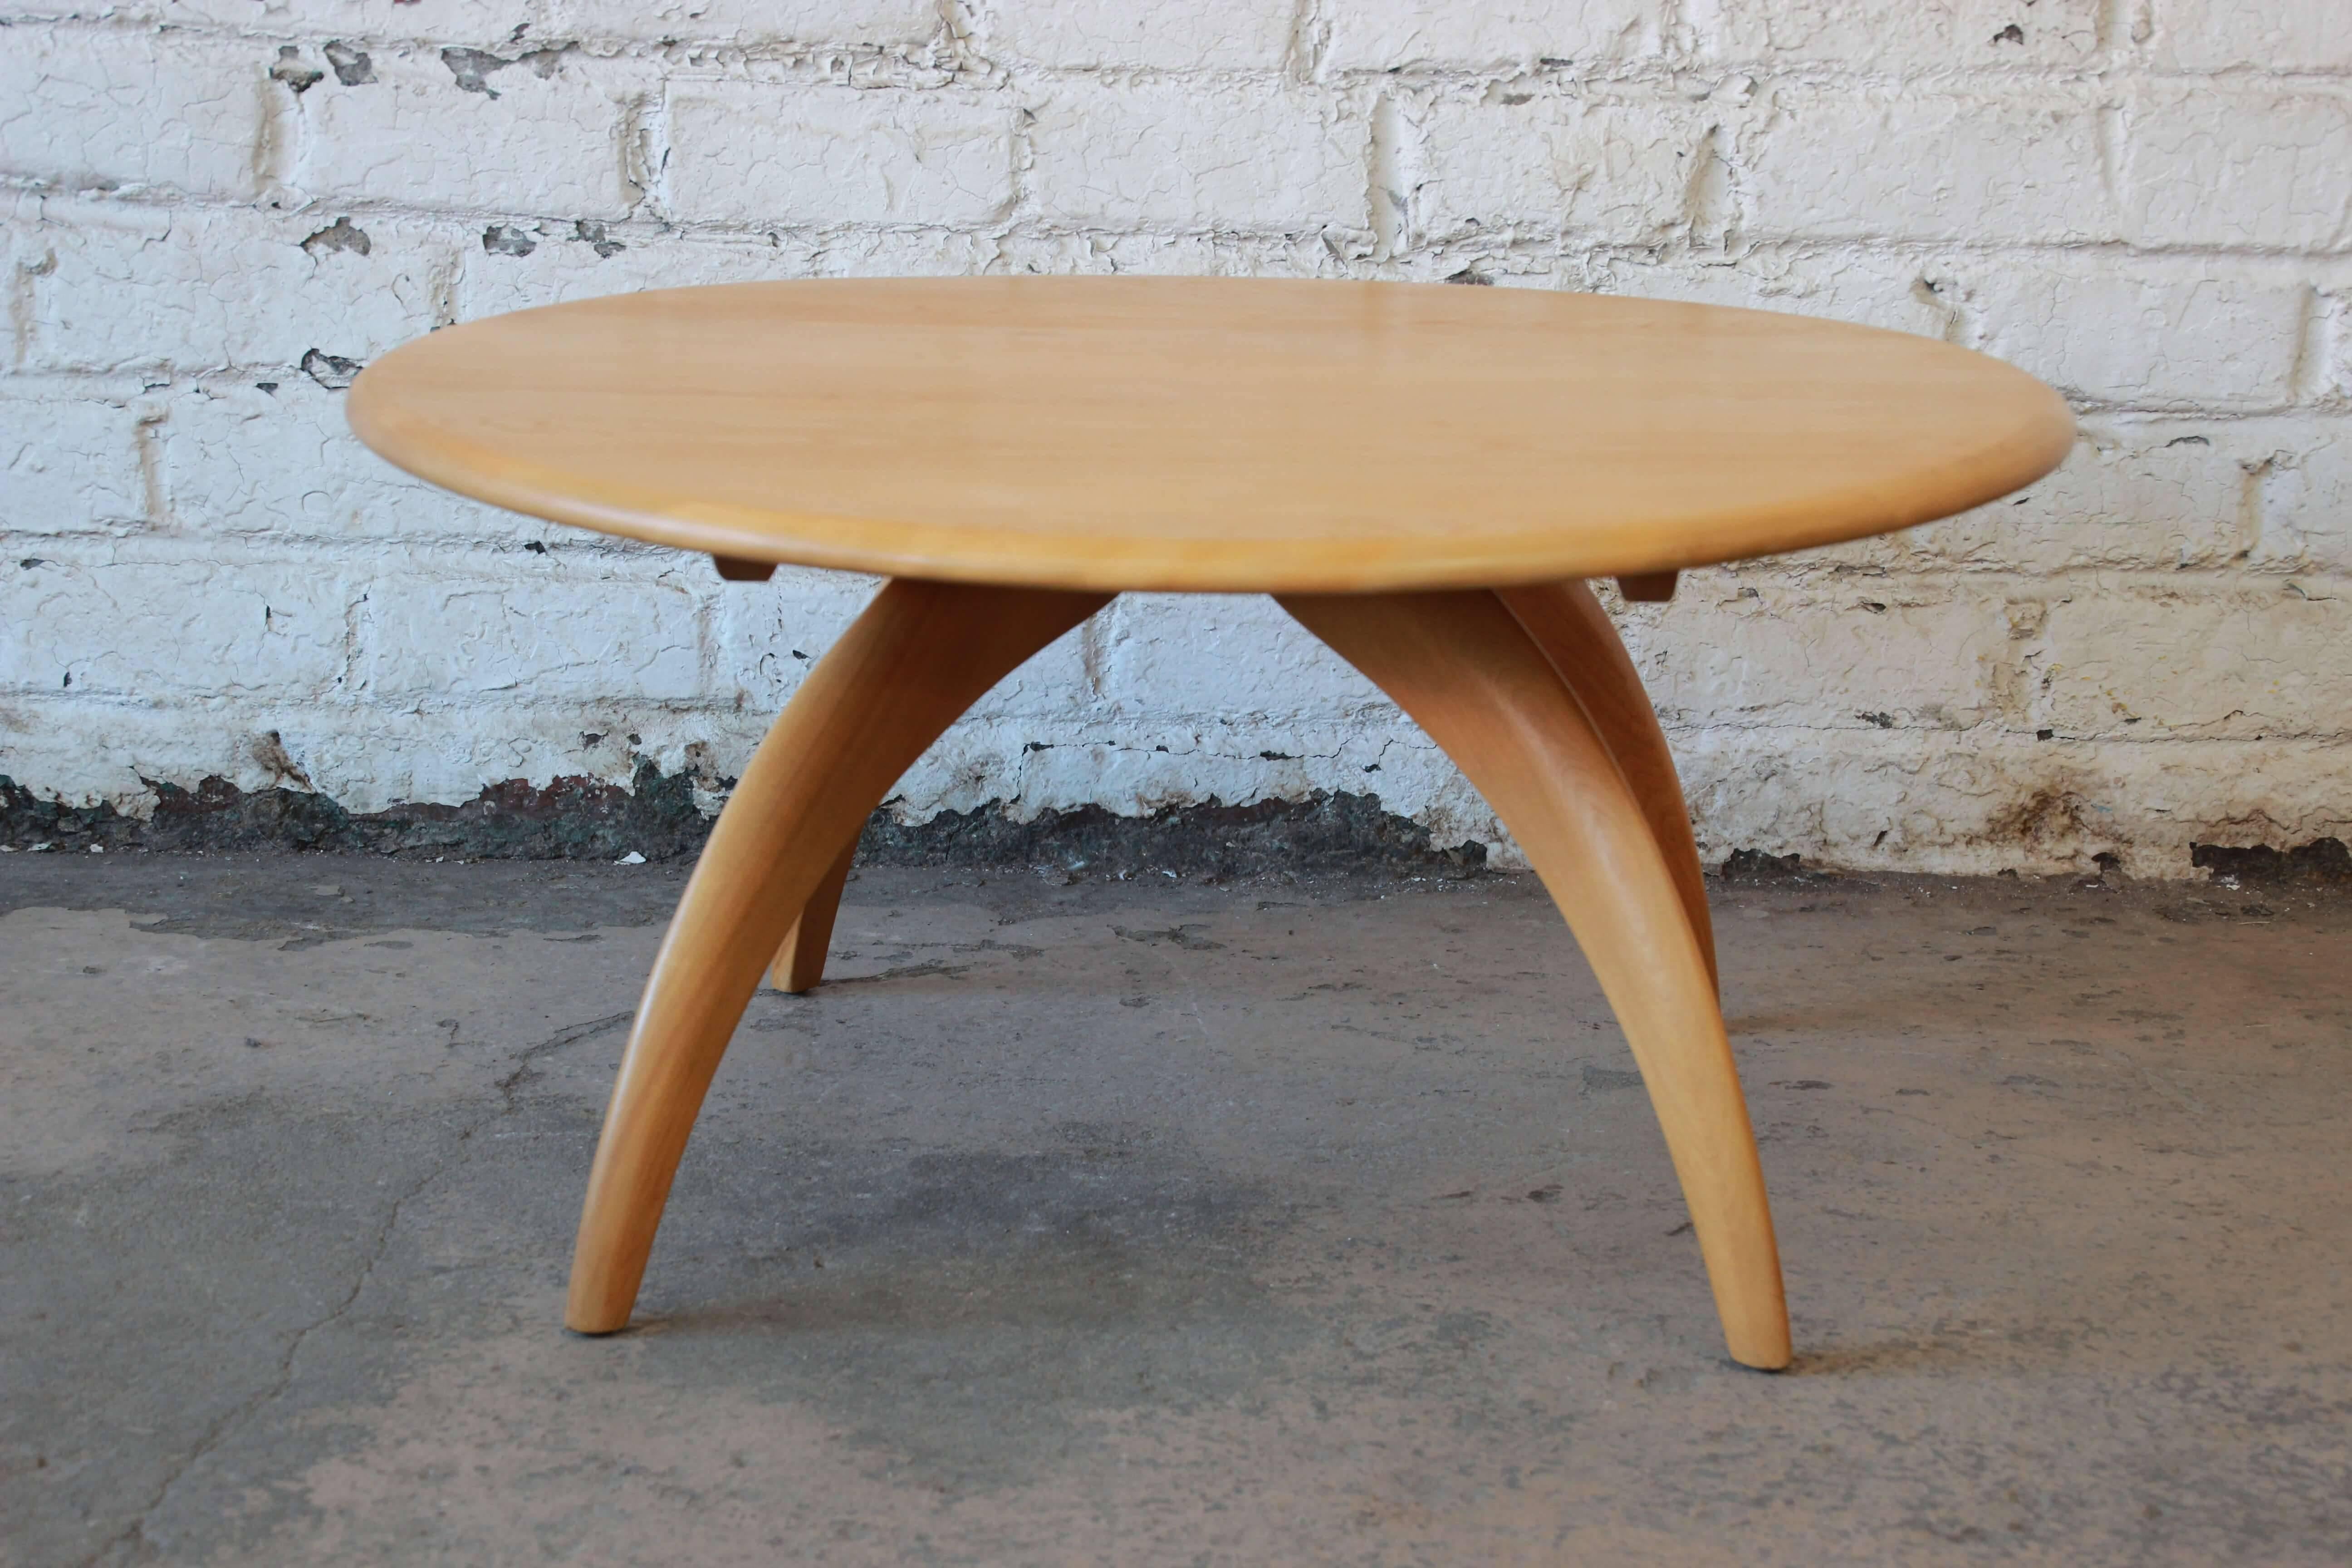 Offering a very nice Heywood-Wakefield Lazy Susan round coffee table. The table has nice wishbone legs that offer great midcentury style. The solid wood tabletop gently spins around as a unique feature. The table is in good vintage condition.